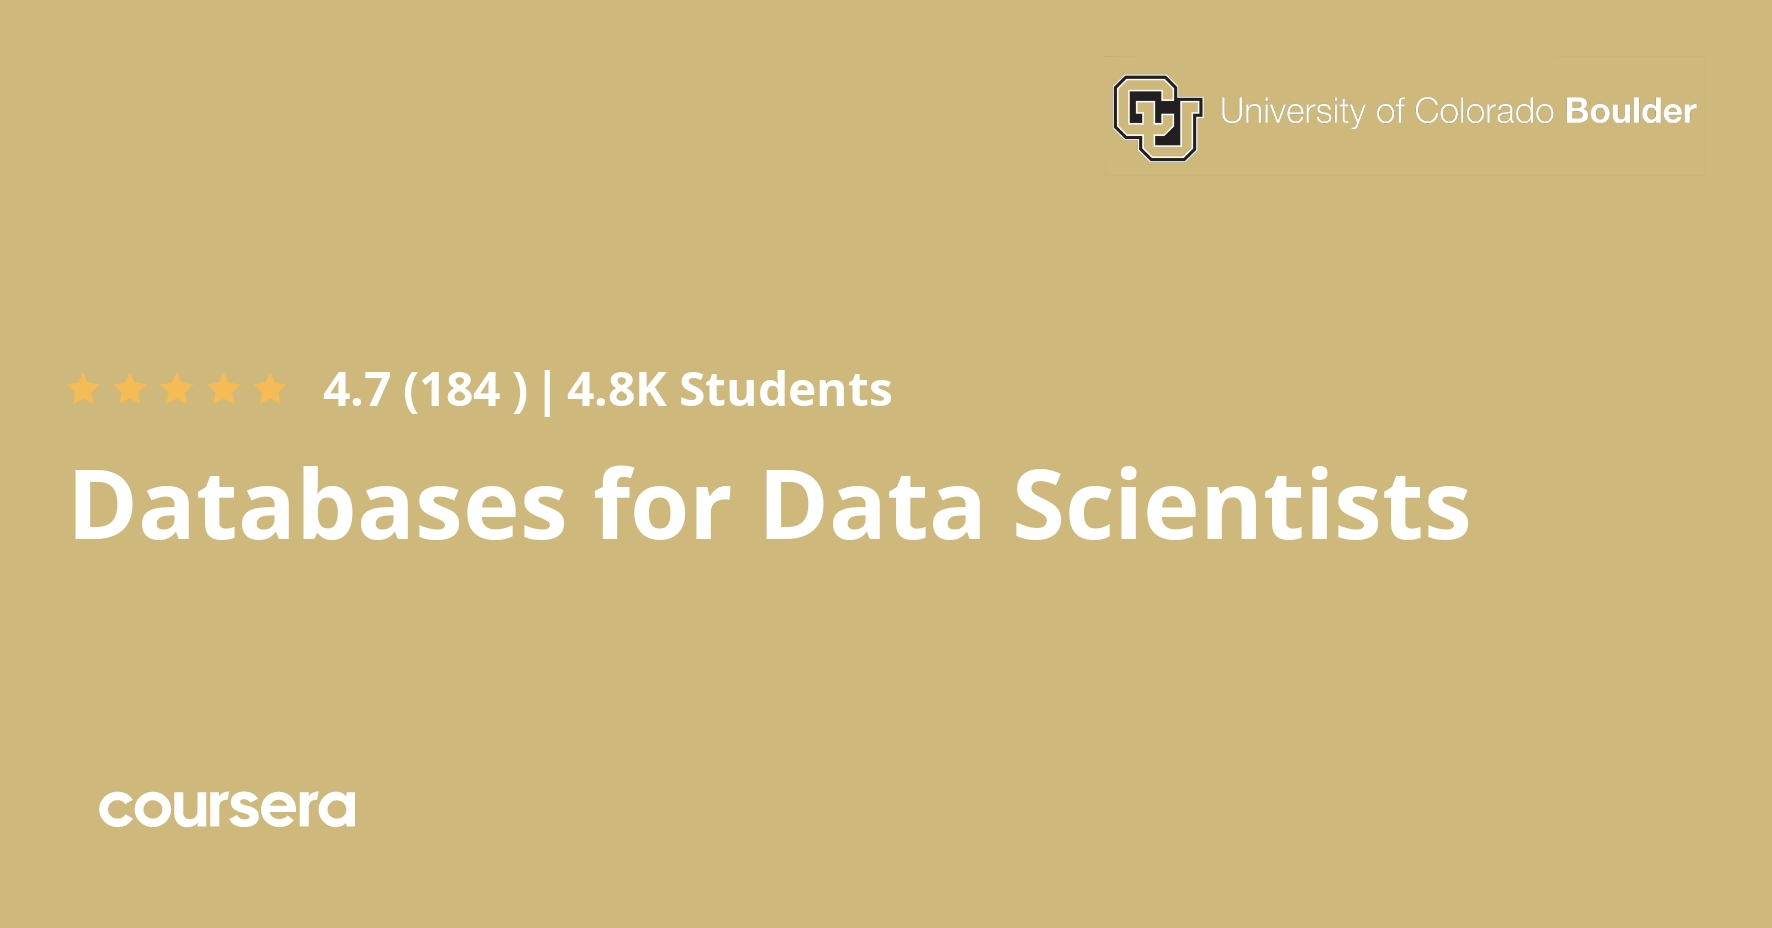 Databases for Data Scientists Specialization